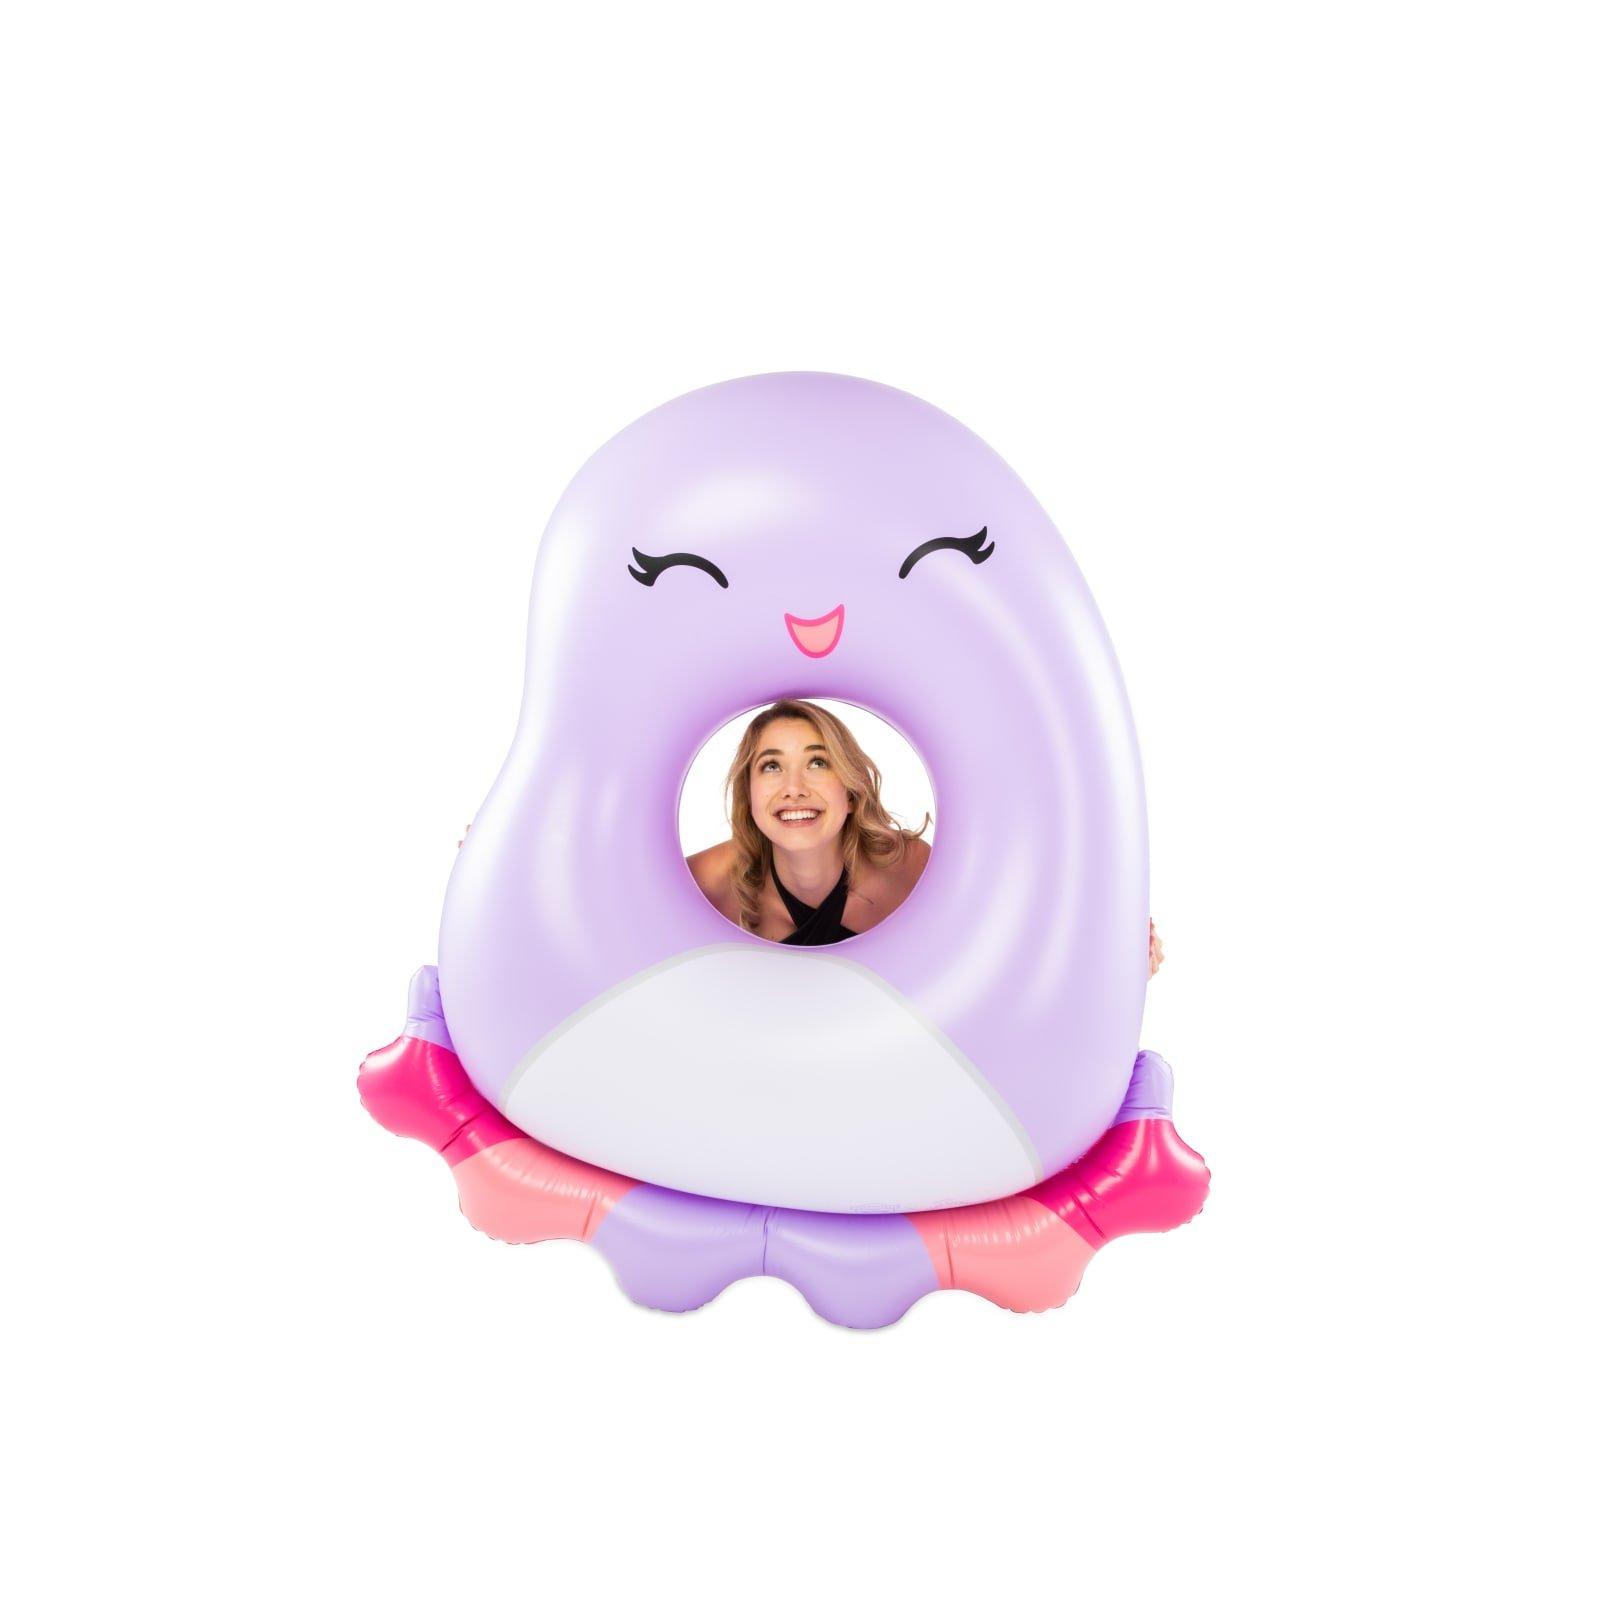 BigMouth  Squishmallows Beula the Octopus Pool Float